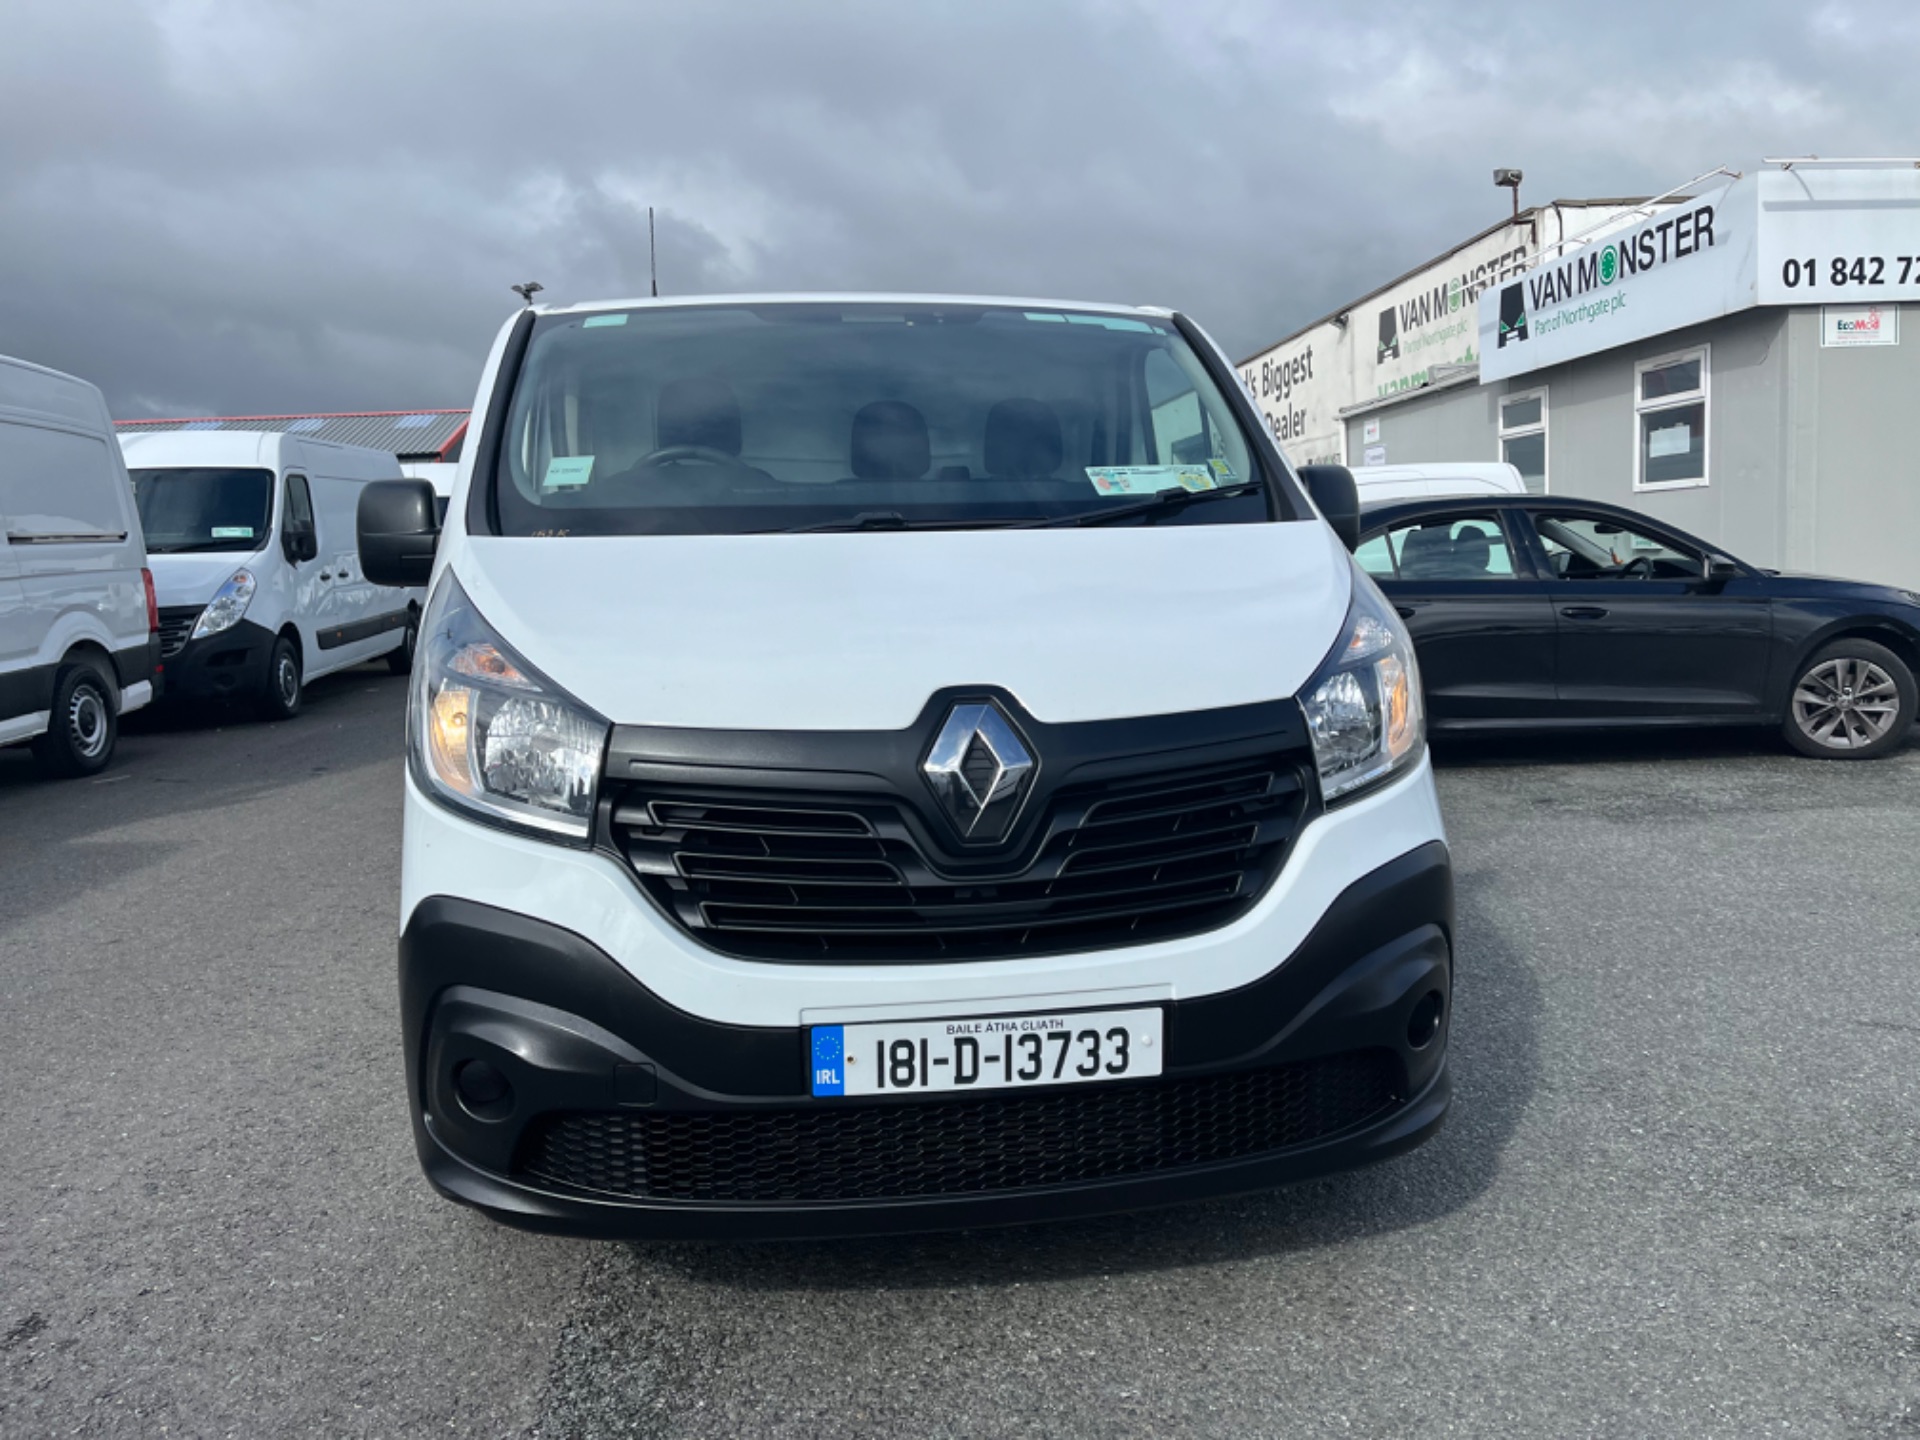 2018 Renault Trafic LL29 DCI 120 Business 3DR (181D13733) Image 2